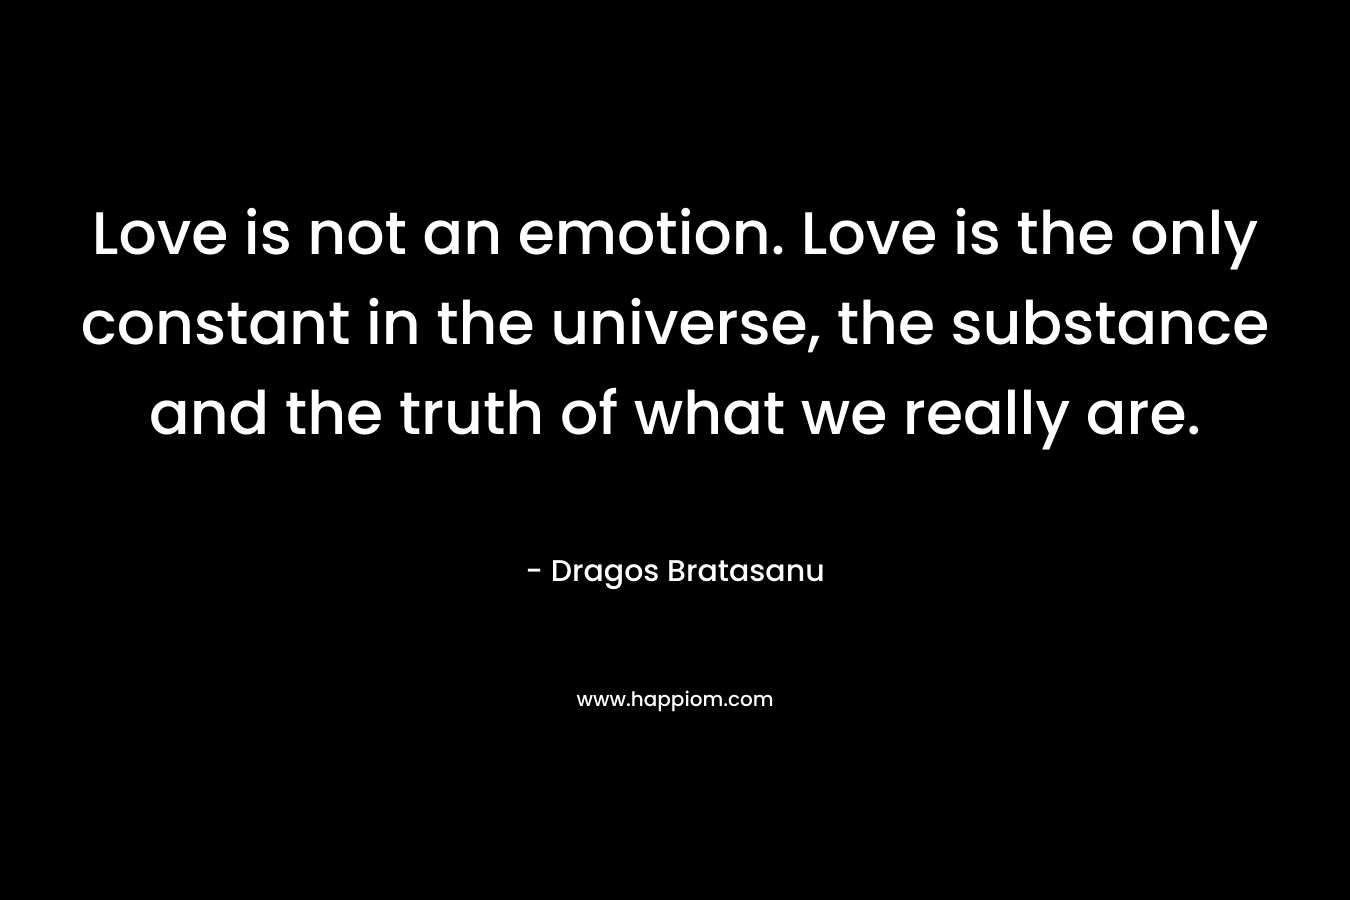 Love is not an emotion. Love is the only constant in the universe, the substance and the truth of what we really are. – Dragos Bratasanu